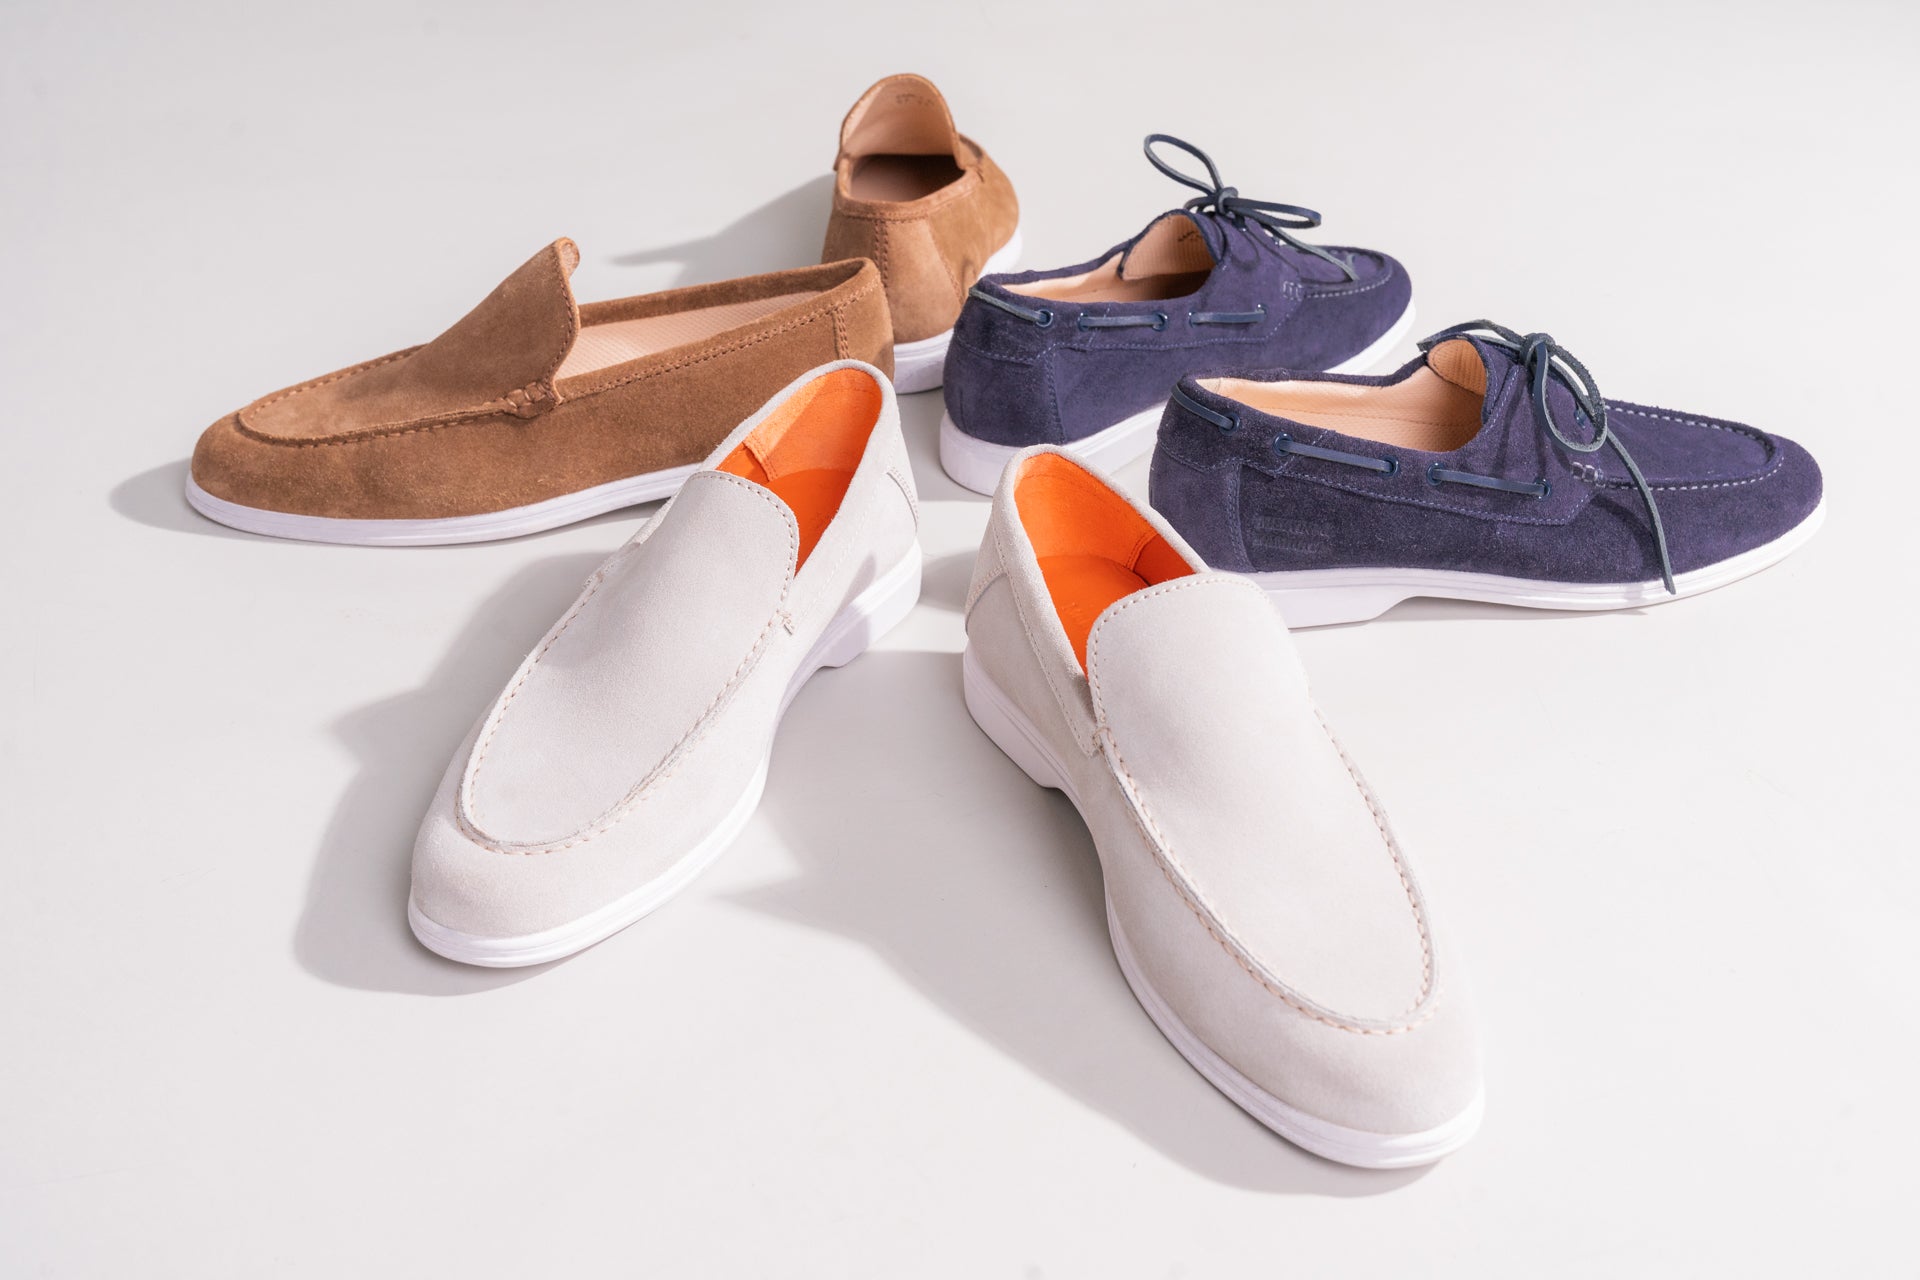 Suede shoes: how to wear this summer's trendy material? – Melvin